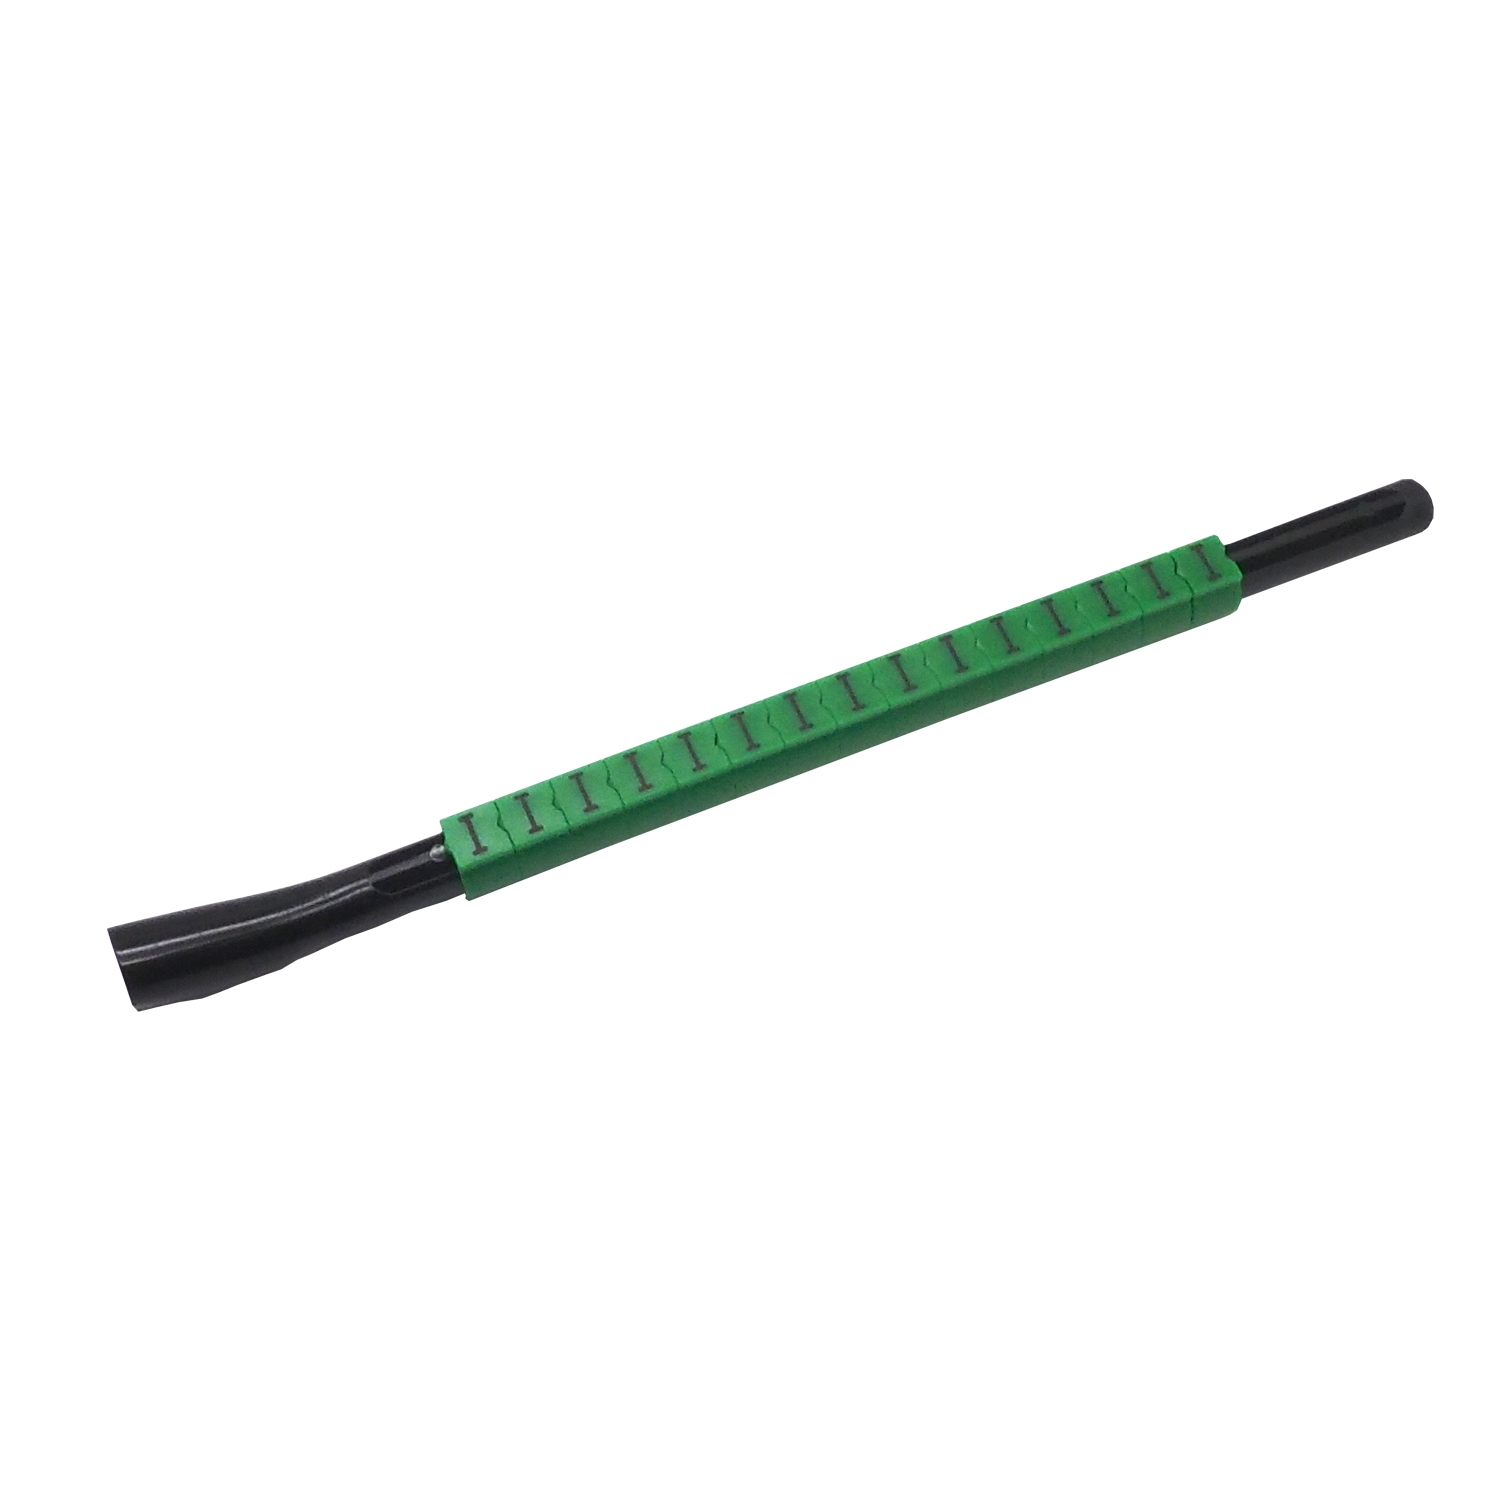 LT-030 Cable wire marker-LT-030